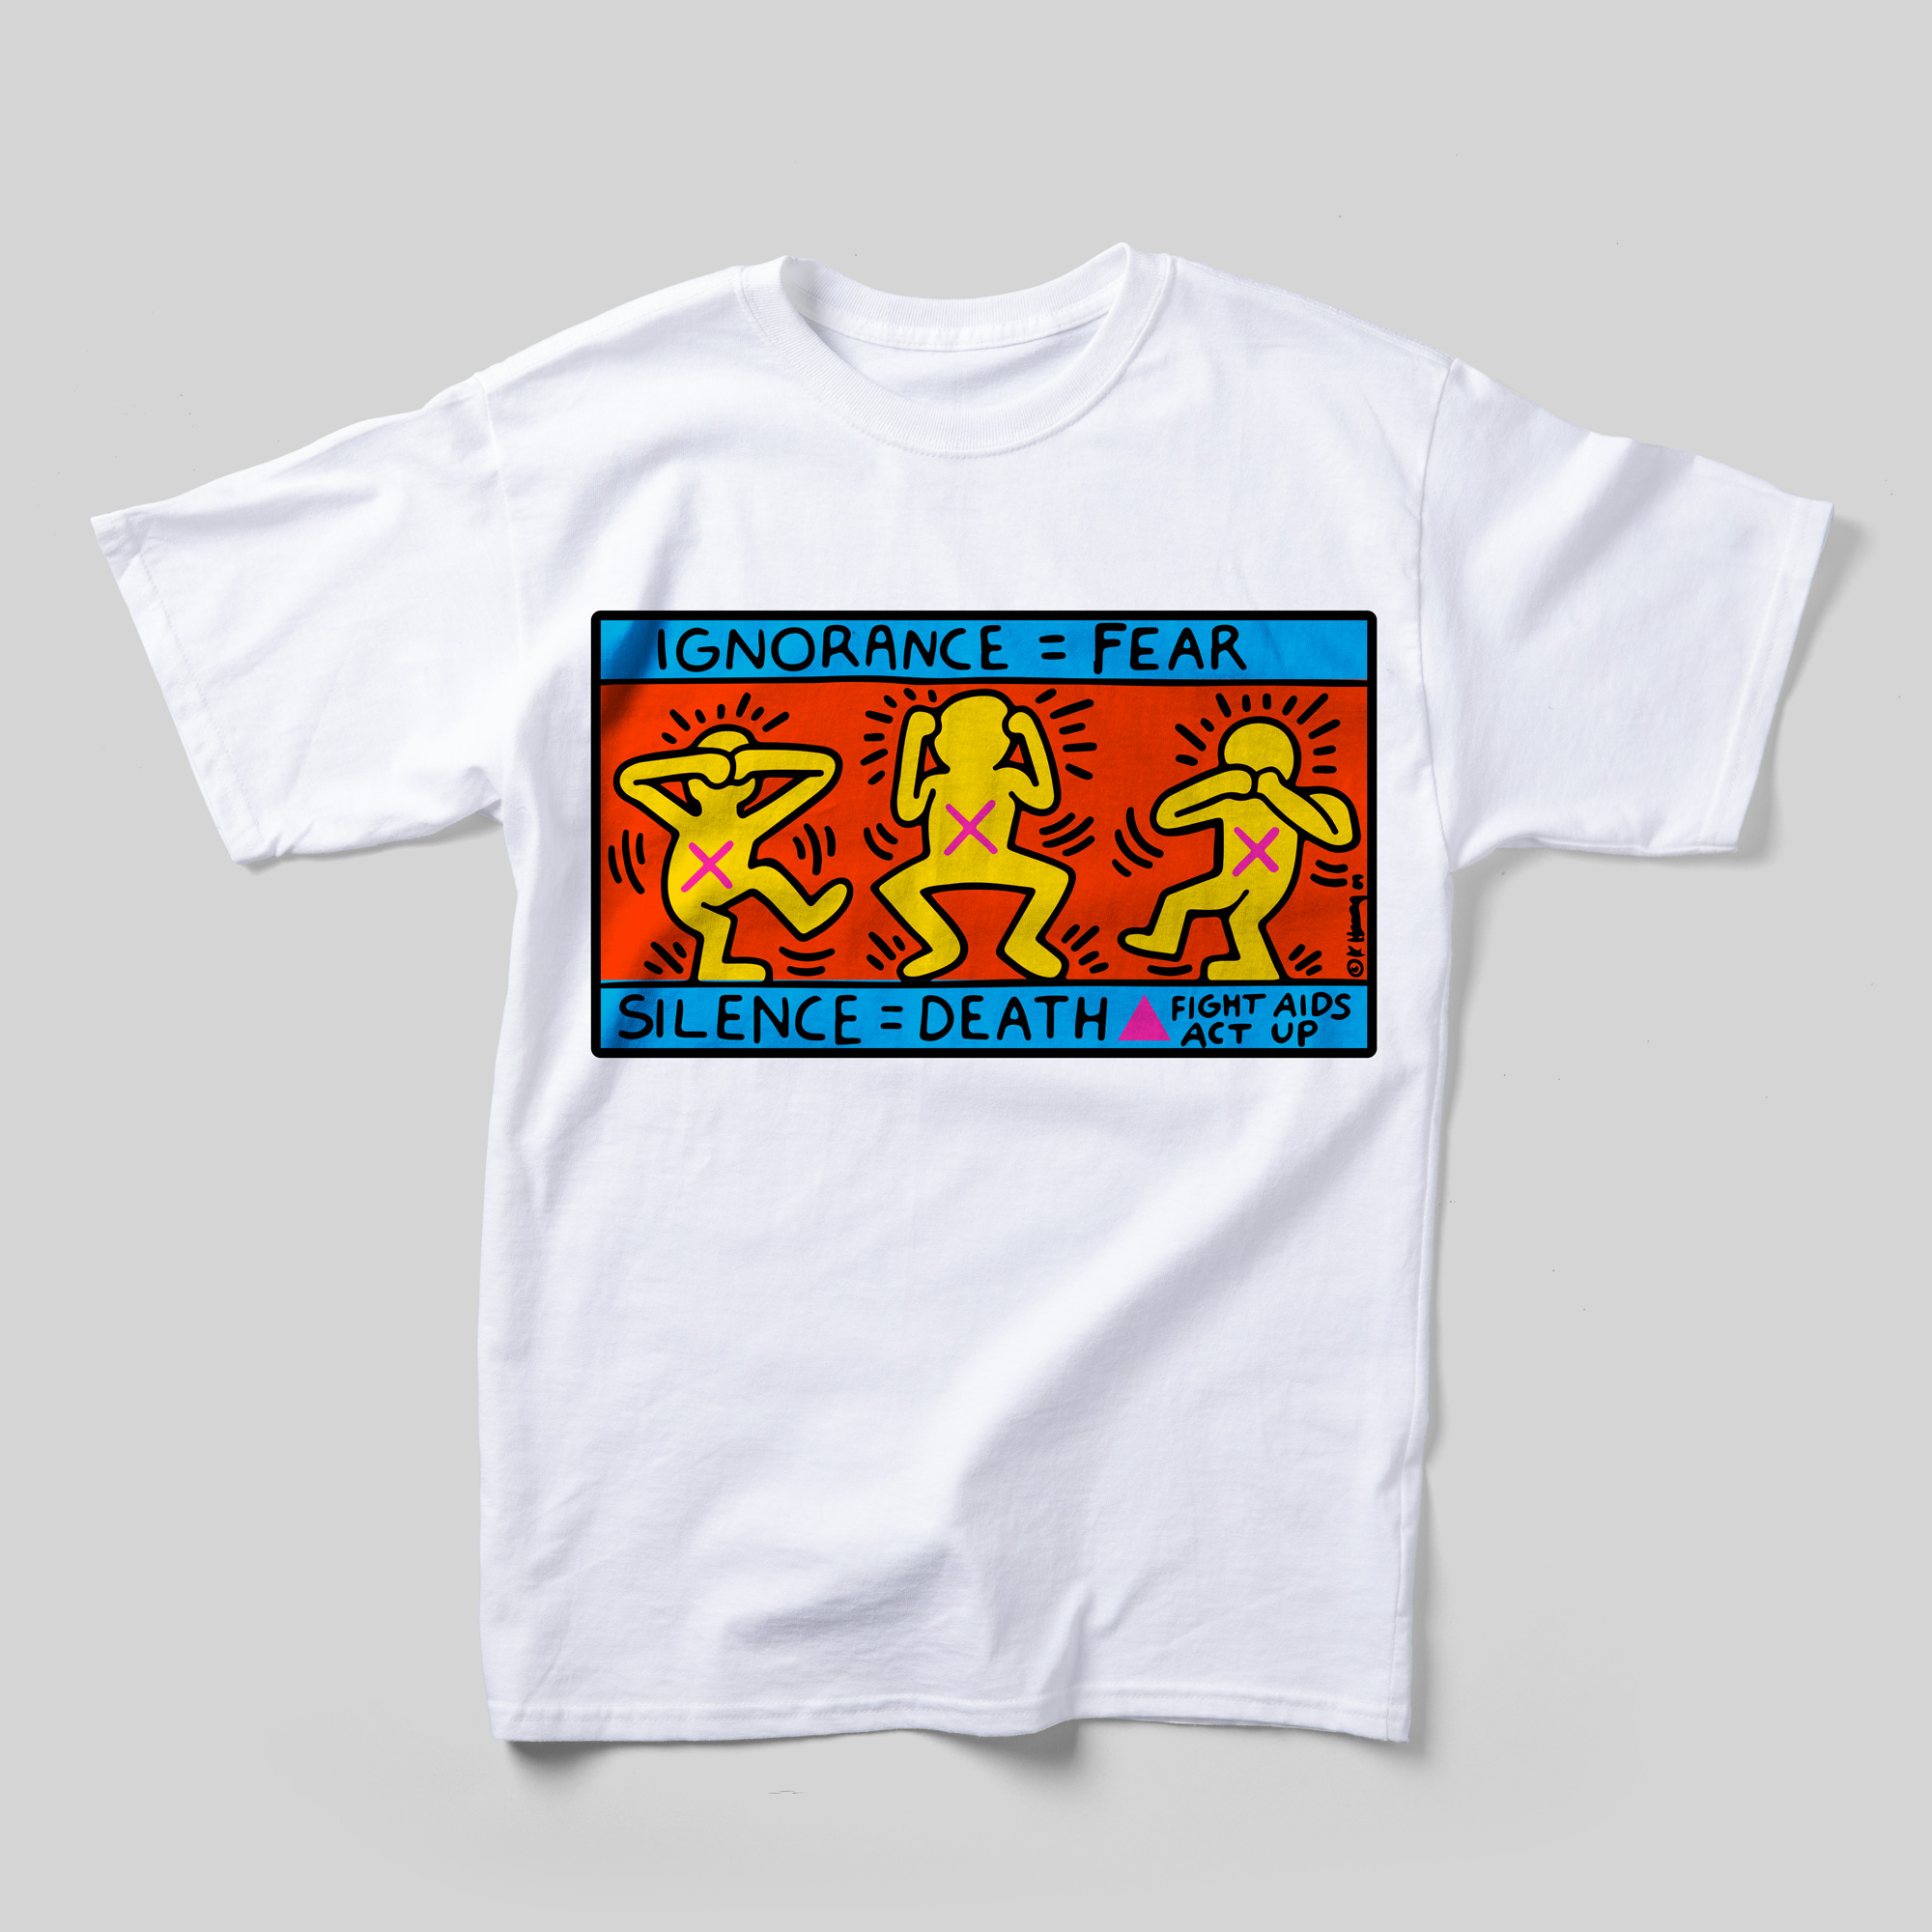 A white t-shirt with Keith Haring's Ignorance = Fear artwork on the front. Within the art, it reads "Ignorance = Fear," "Silence = Death," and "Fight AIDS ACT UP."